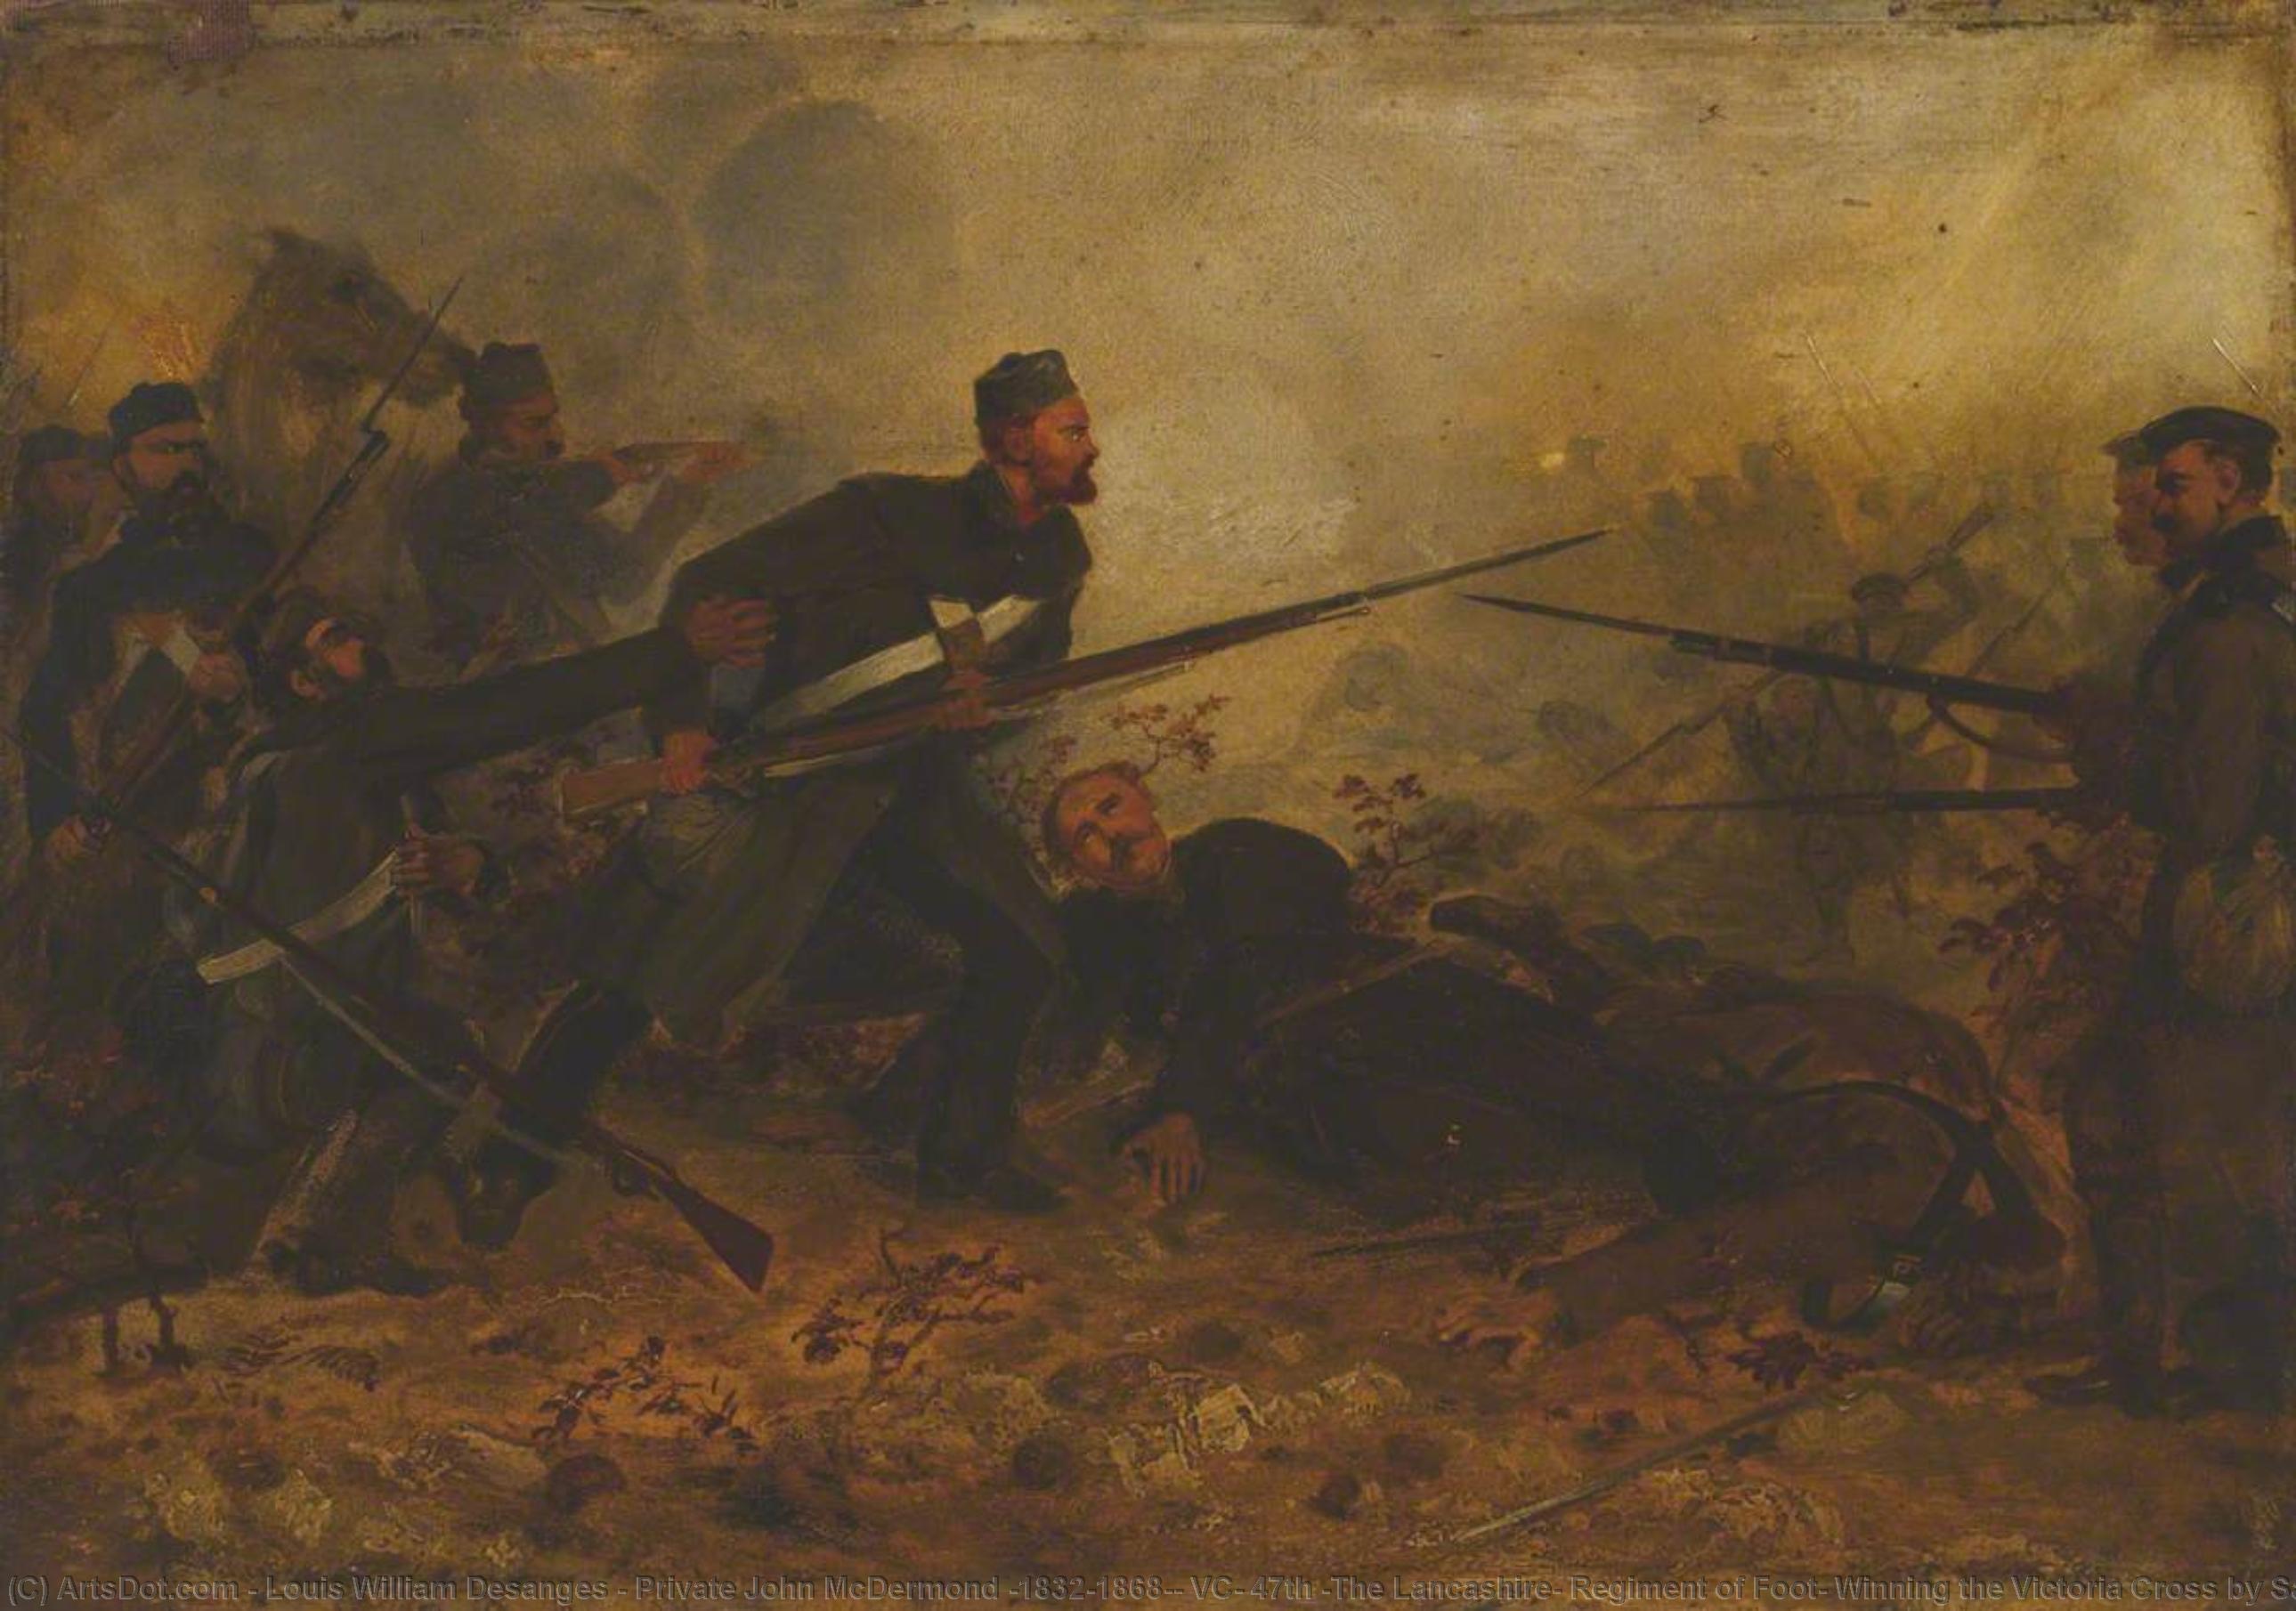 Order Oil Painting Replica Private John McDermond (1832–1868), VC, 47th (The Lancashire) Regiment of Foot, Winning the Victoria Cross by Saving Colonel Haly, His Commanding Officer, at Inkerman, on 5 November 1854, 1860 by Louis William Desanges | ArtsDot.com